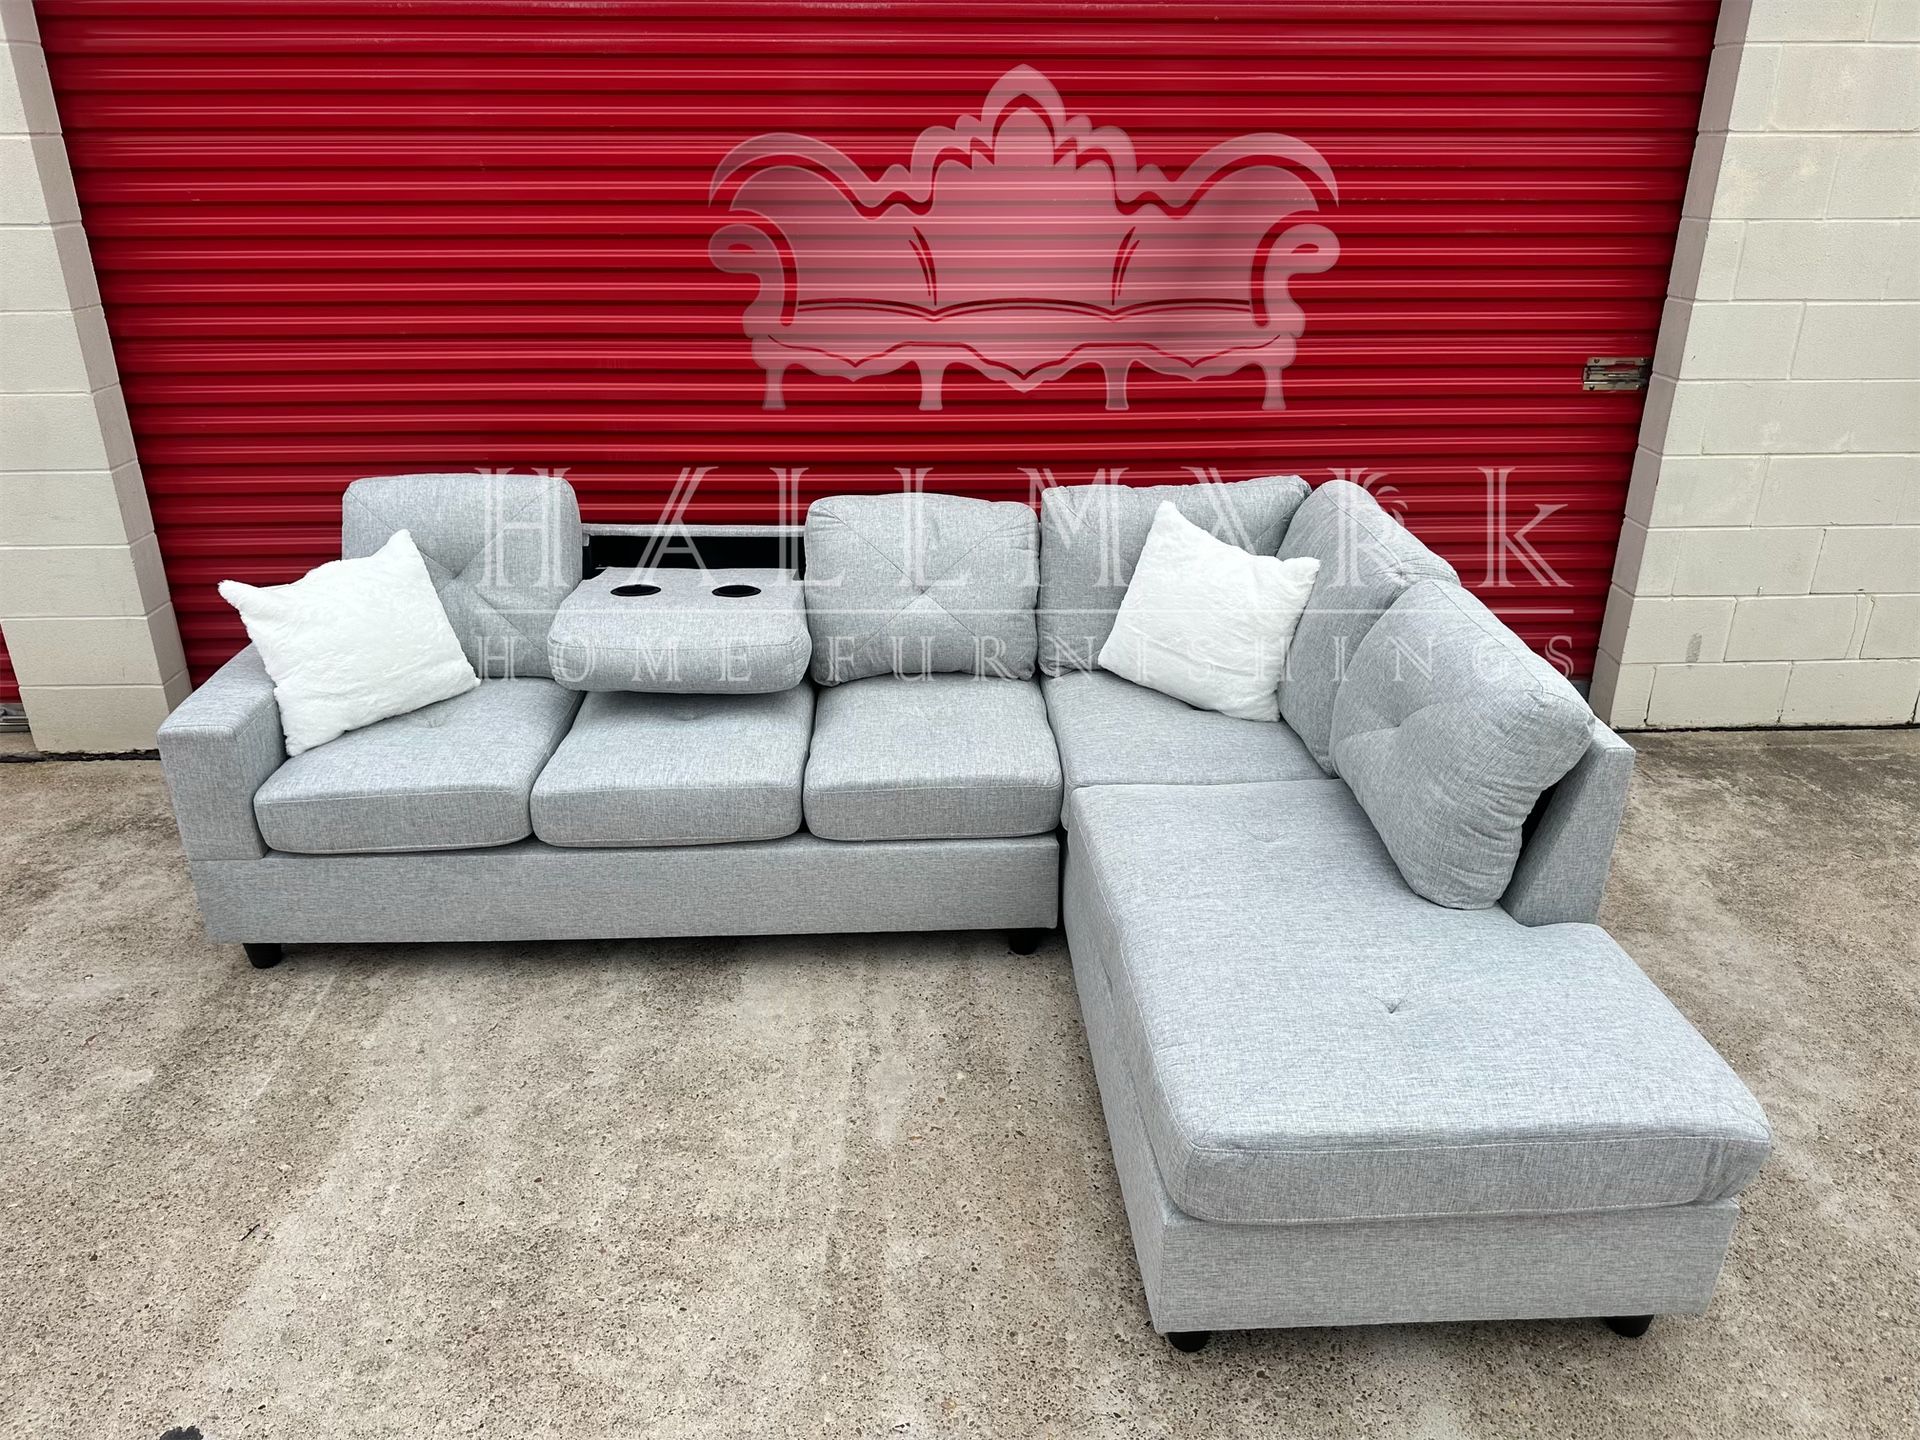 New Grey Sectional Couches (🚚FREE DELIVER